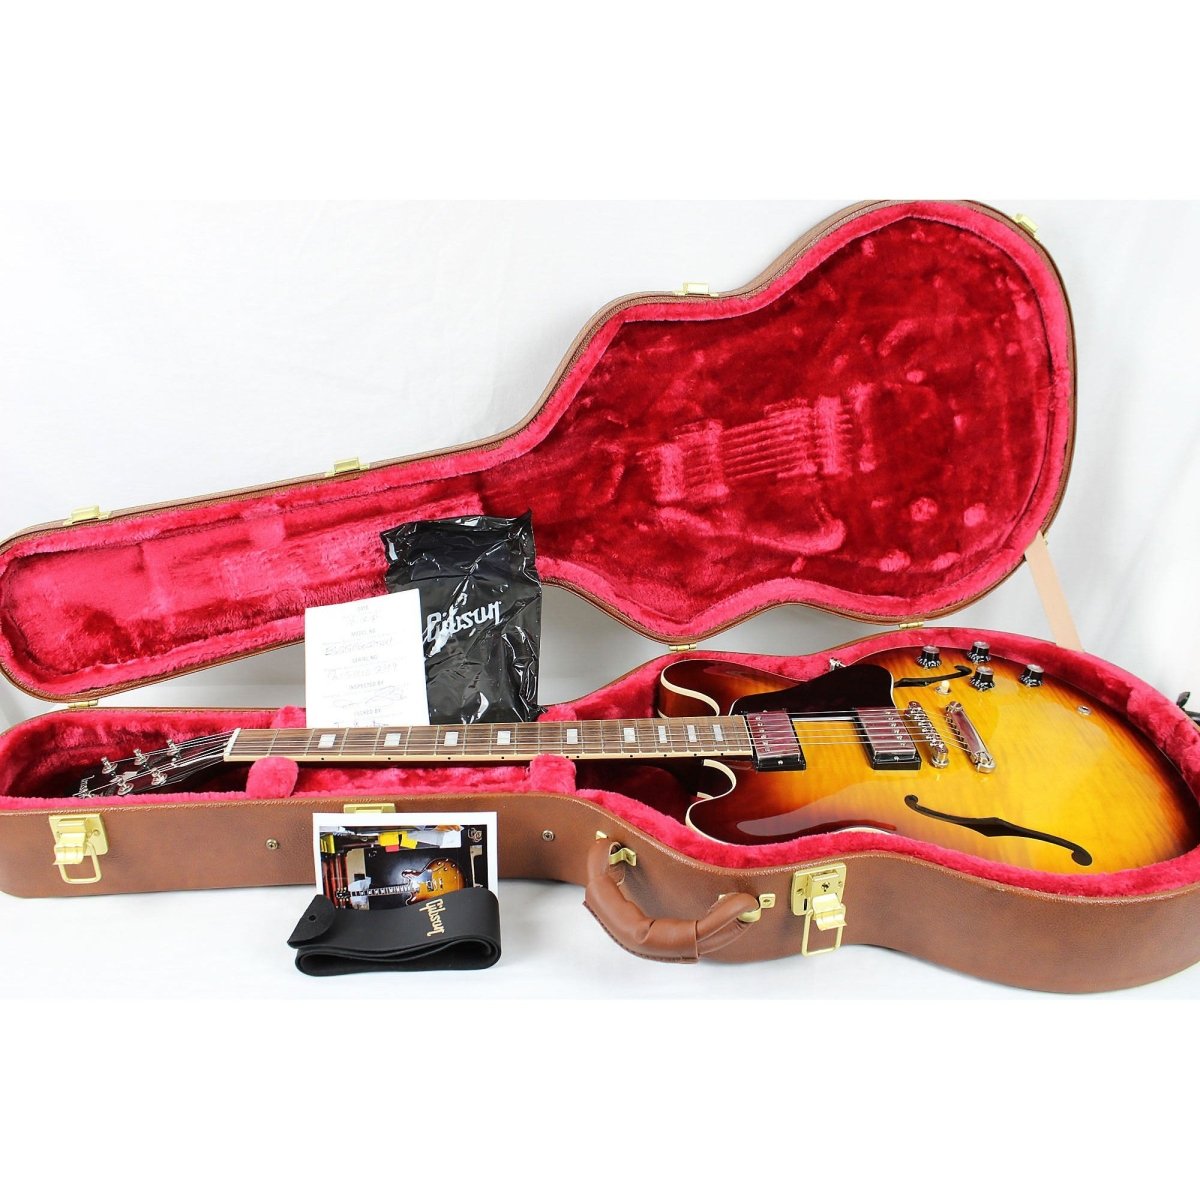 2021 Gibson ES-335 Figured w/ Block Inlays - Iced Tea **USED - EXCELLENT** - Leitz Music--215410249